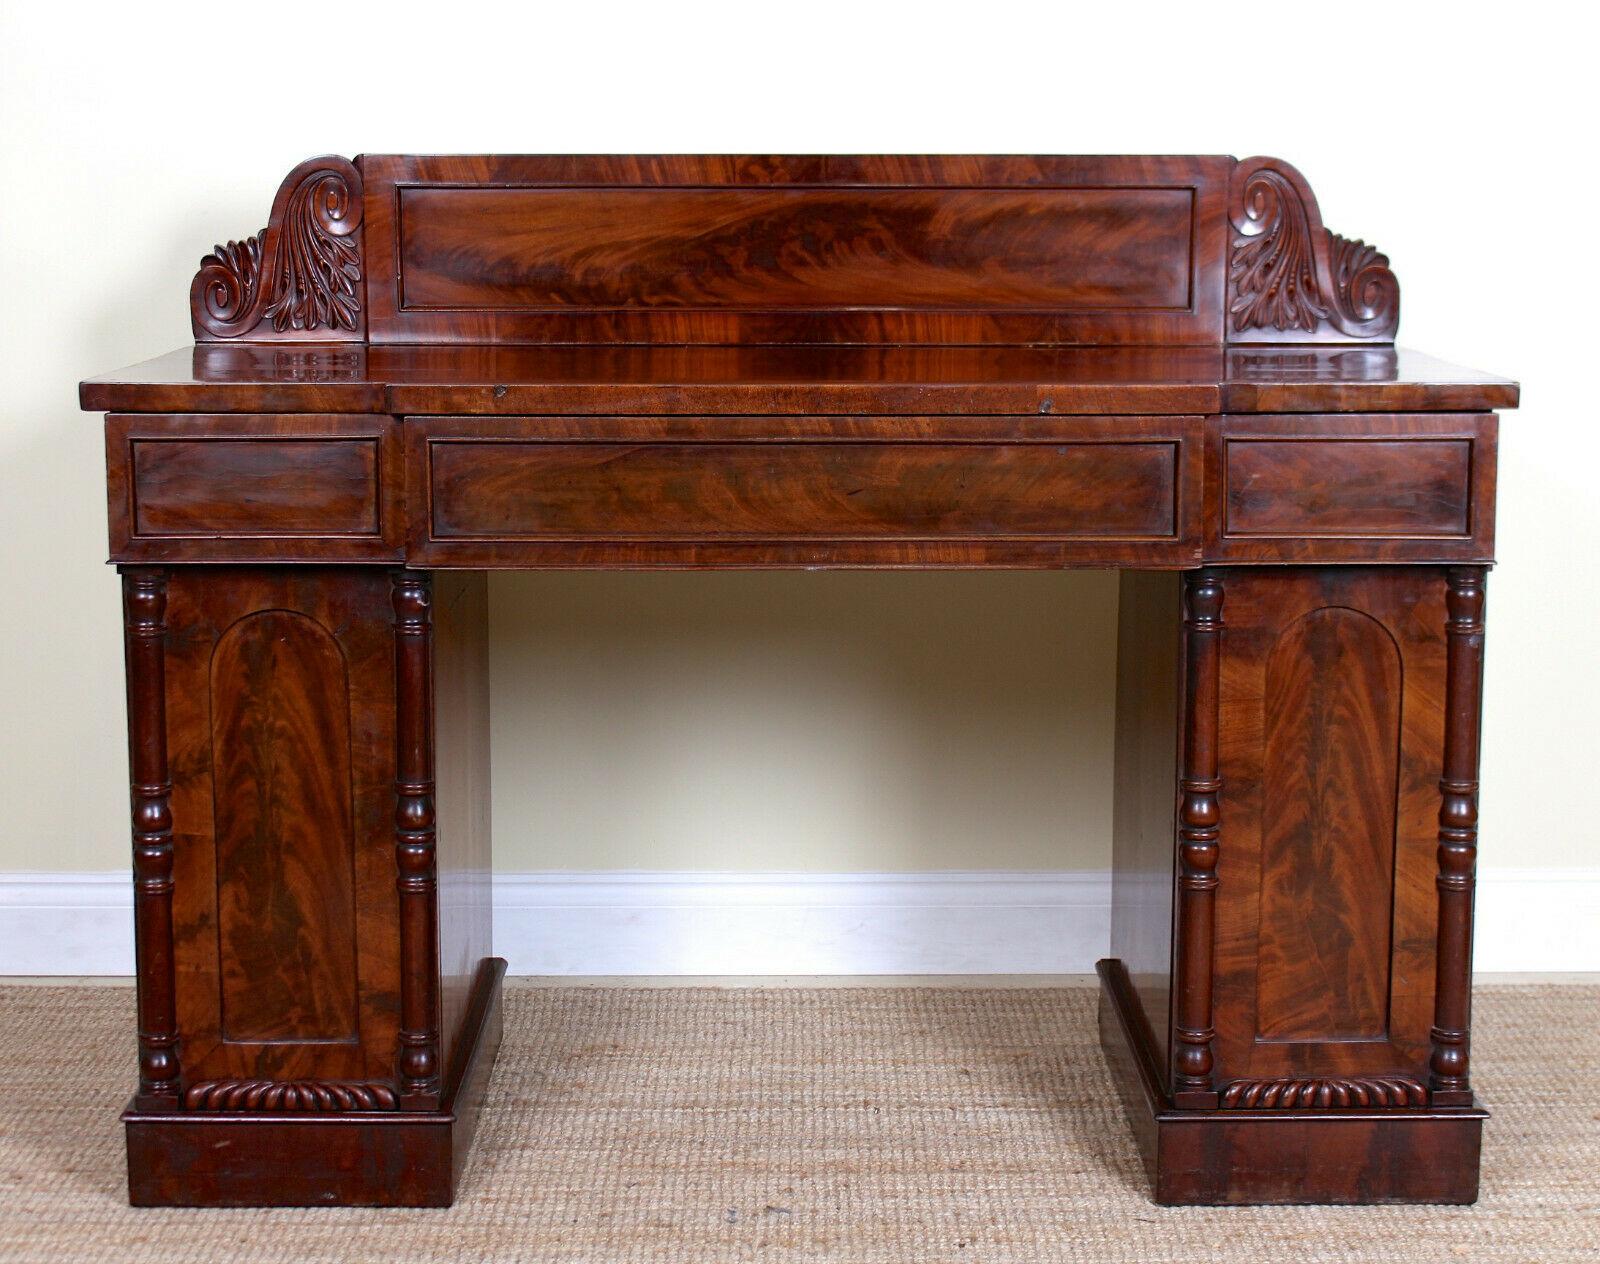 Regency period breakfront twin pedestal sideboard.
The Cuban mahogany marquetry work boasting a well figured polished flamed grain.
A well carved backsplash above the breakfront form top fitted three drawers to frieze with oak lined